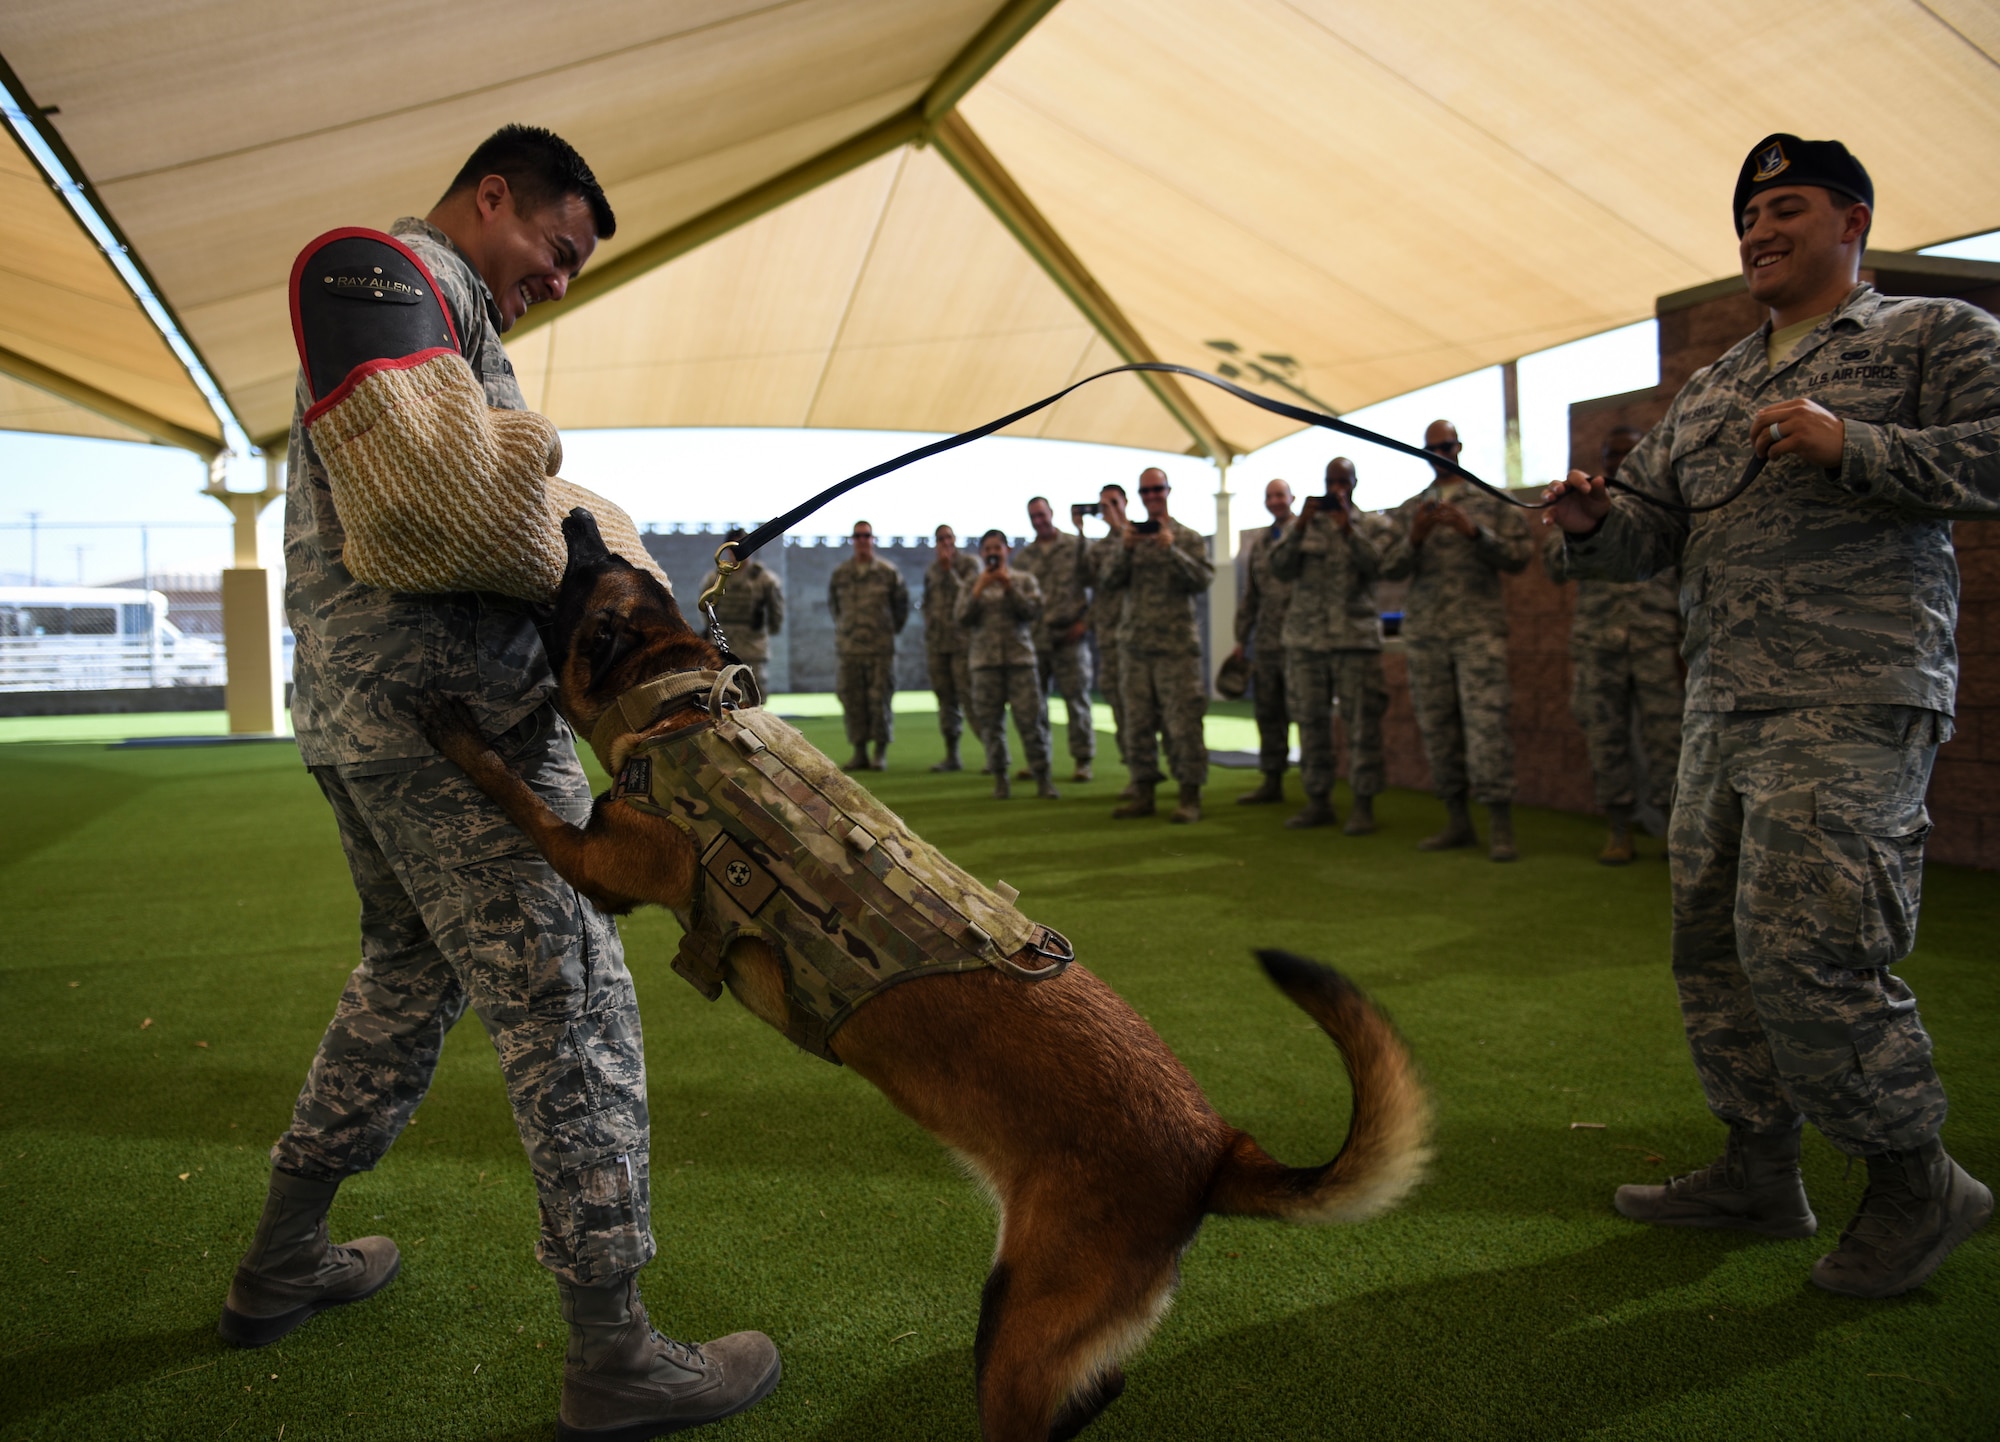 Staff Sgt. Ryne Wilson, 99th Security Forces Squadron military working dog handler, and his K-9, Sseneca, perform a demonstration on Tech. Sgt. Randy Corrasco, 926th Wing quality assurance inspector, for the Warrior Stripe program at Nellis Air Force Base, Nevada, Aug. 17, 2018. The two-week course brought together 40 U.S. Air Force Warfare Center NCOs to provide an avenue for them to develop as military and professional leaders. (U.S. Air Force photo by Airman 1st Class Andrew D. Sarver)